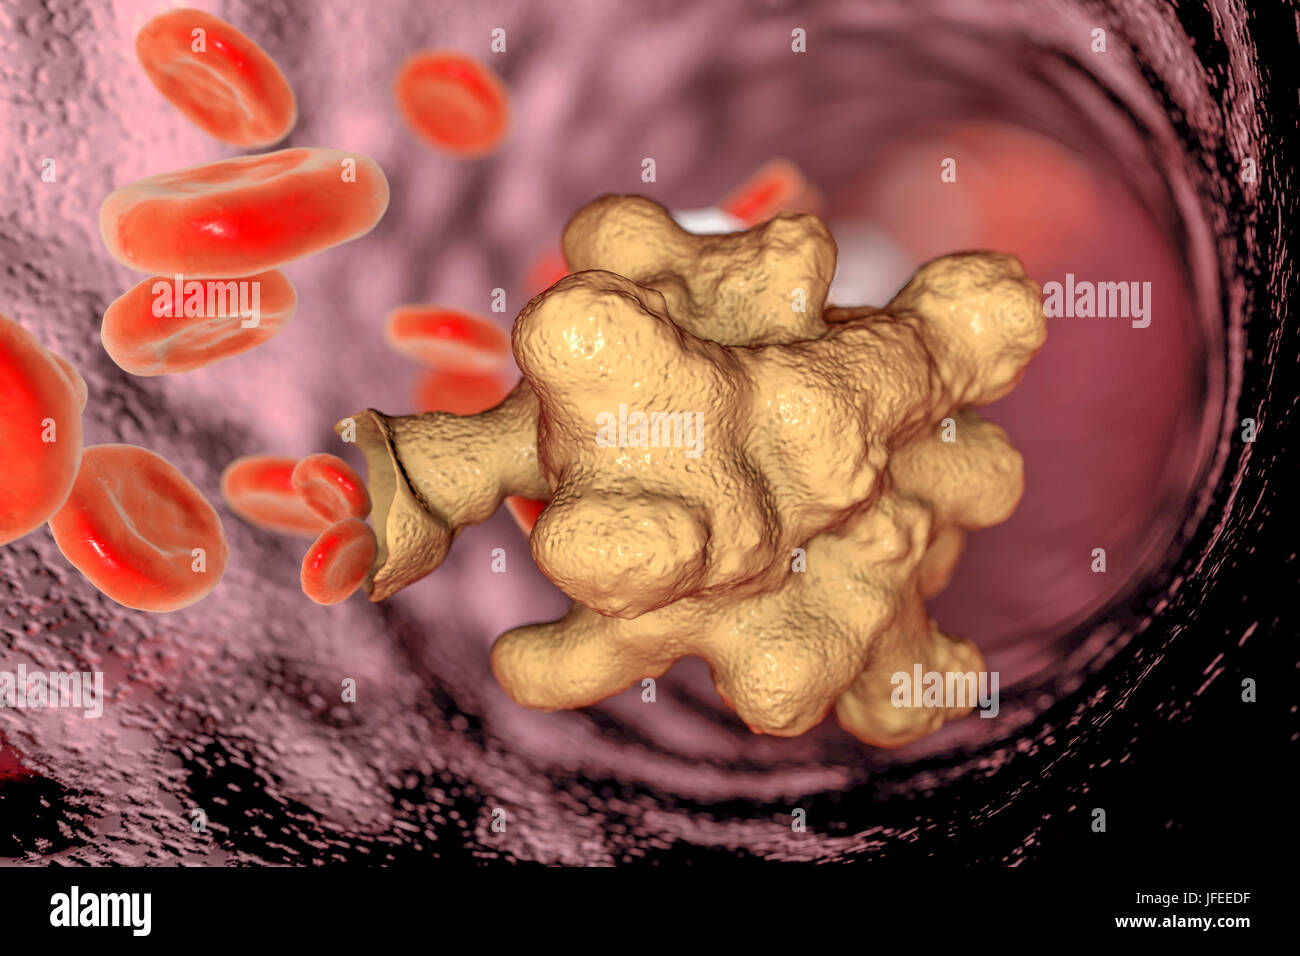 Parasitic amoeba (Entamoeba histolytica) in a blood vessel, computer illustration. This single-celled organism causes amoebic dysentery and ulcers (vegetative trophozoite stage). It is spread by faecal contamination of food and water and is most common where sanitation is poor. Amoebae invade the intestine but may spread to the liver, lungs and other tissues. Infection is caused by the ingestion of cysts that develop into the pathogenic trophozoite amoeba seen here. Entamoeba histolytica occurs worldwide, with up to 50% of the population being infected primarily in warmer climates. Stock Photo